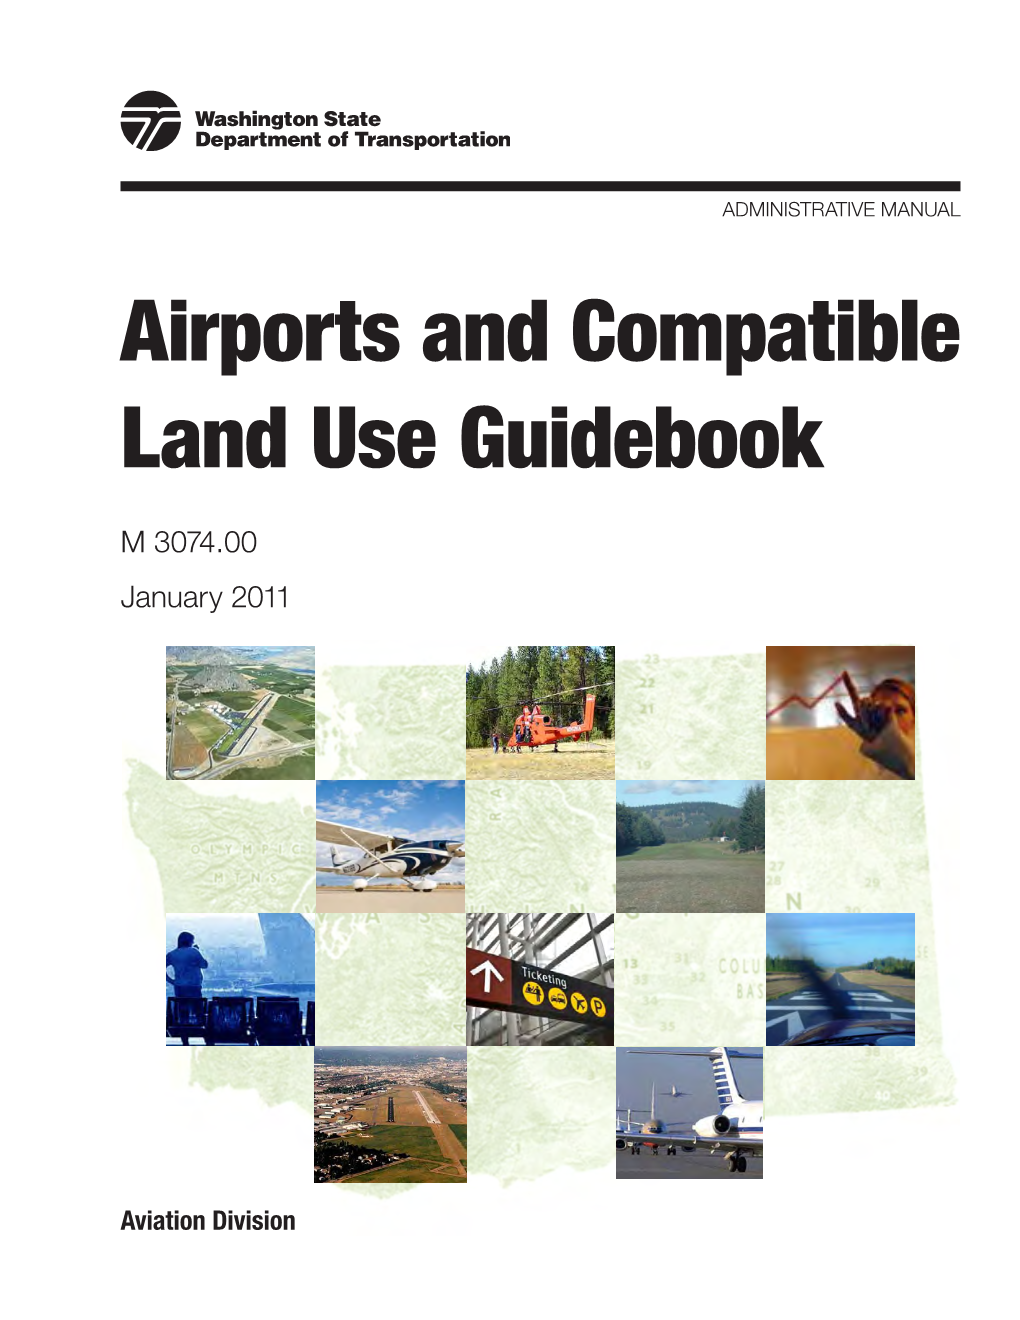 Airports and Compatible Land Use Guidebook M 3074.00 Page Iii January 2011 Executive Summary